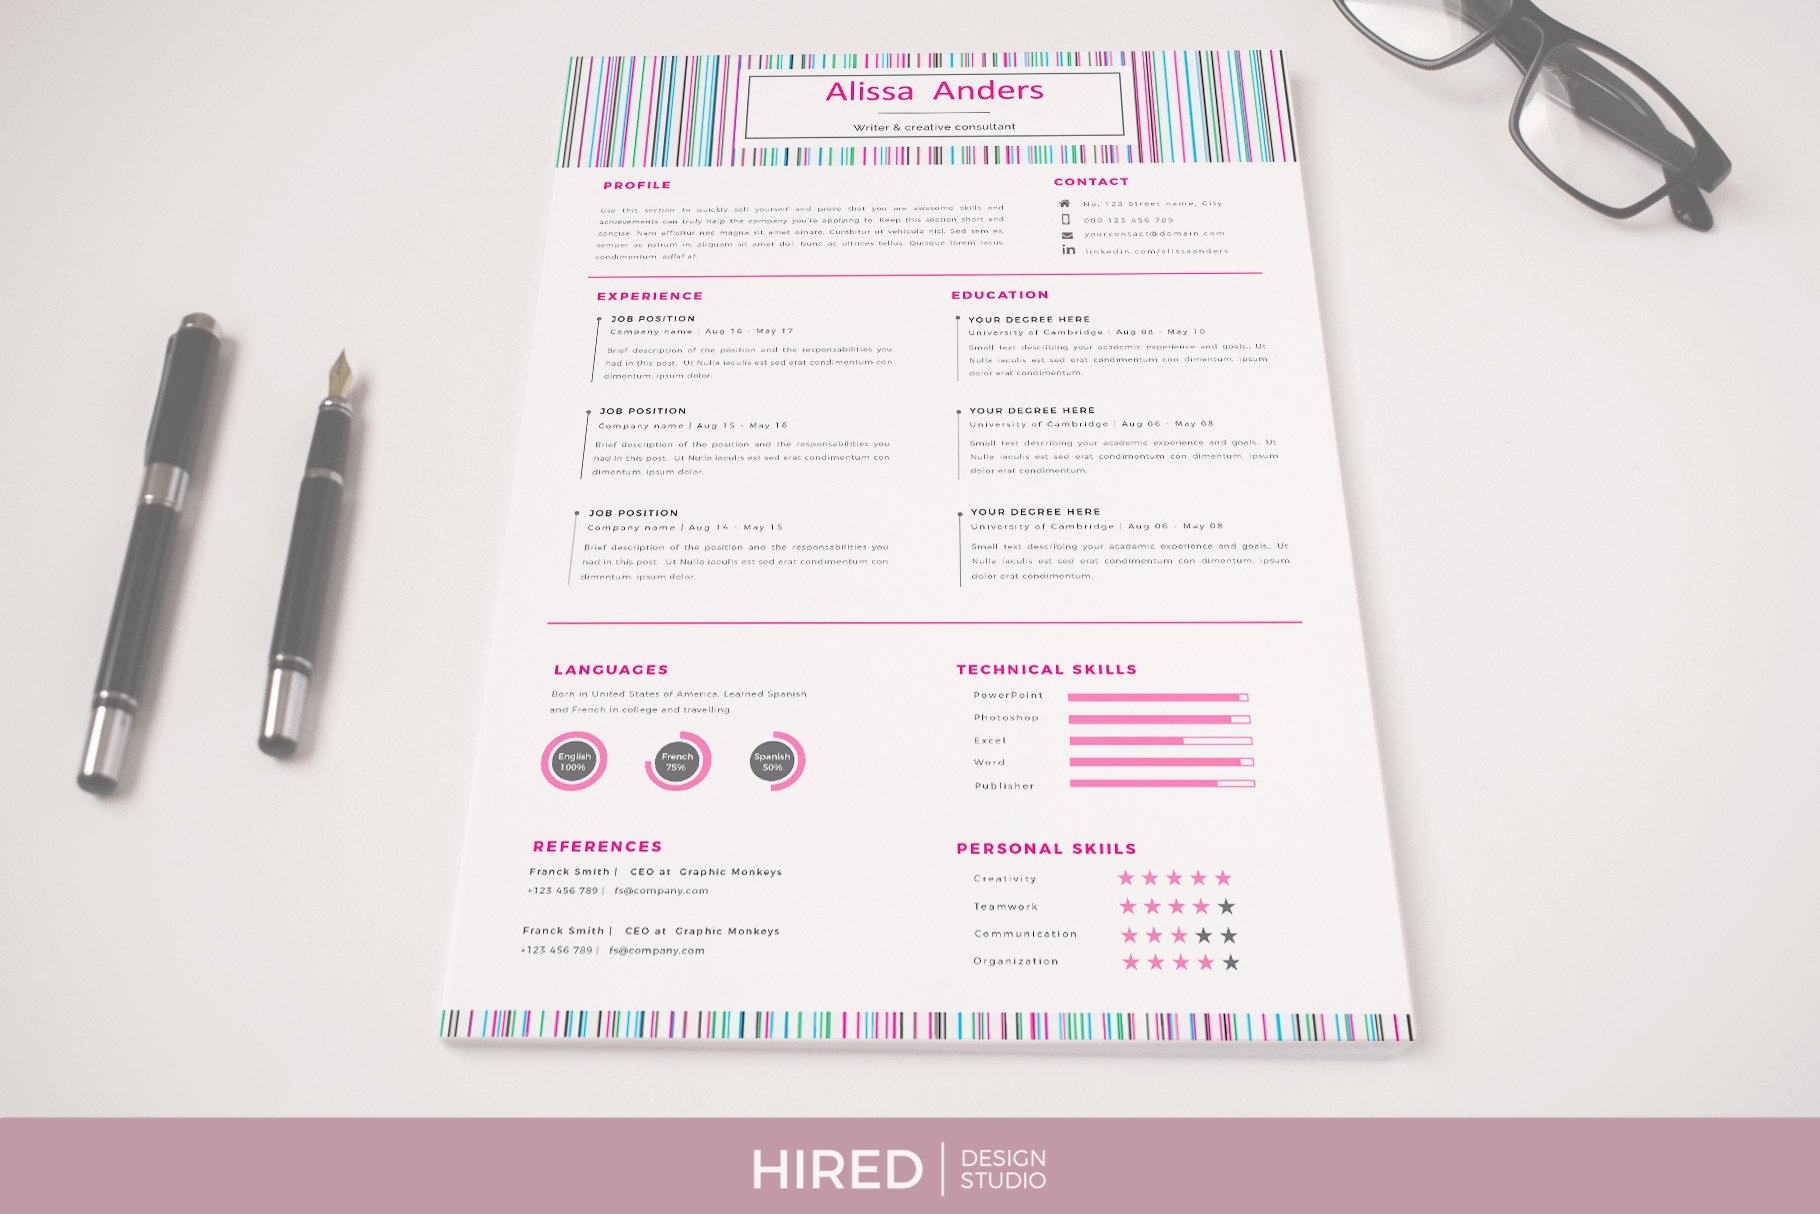 cretive resume frontal view 498